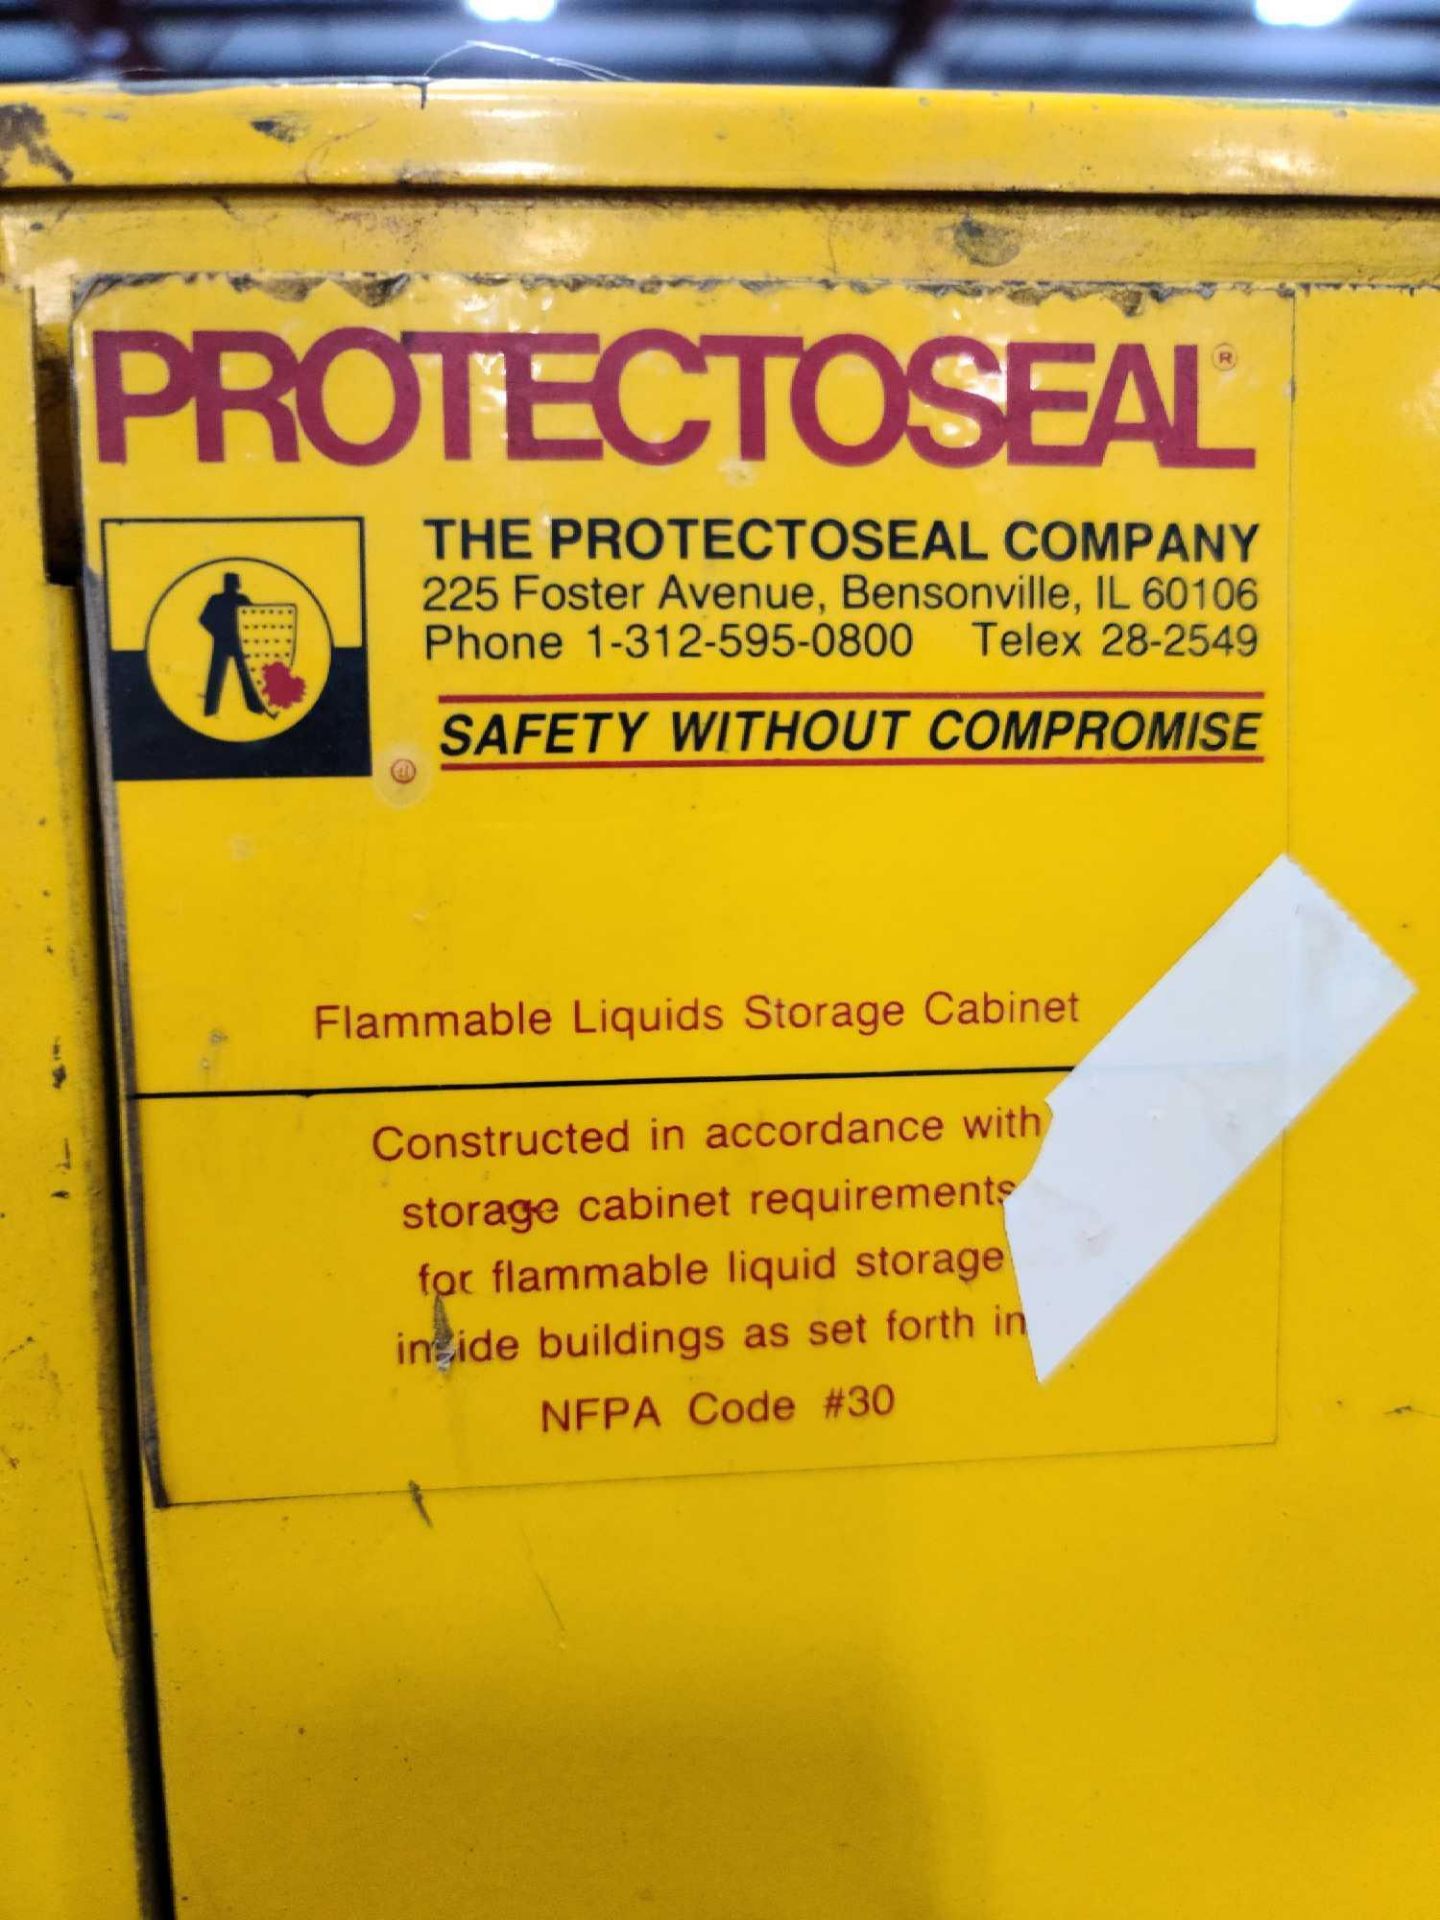 Protectoseal Flammable Liquids Storage Cabinet - Image 3 of 4